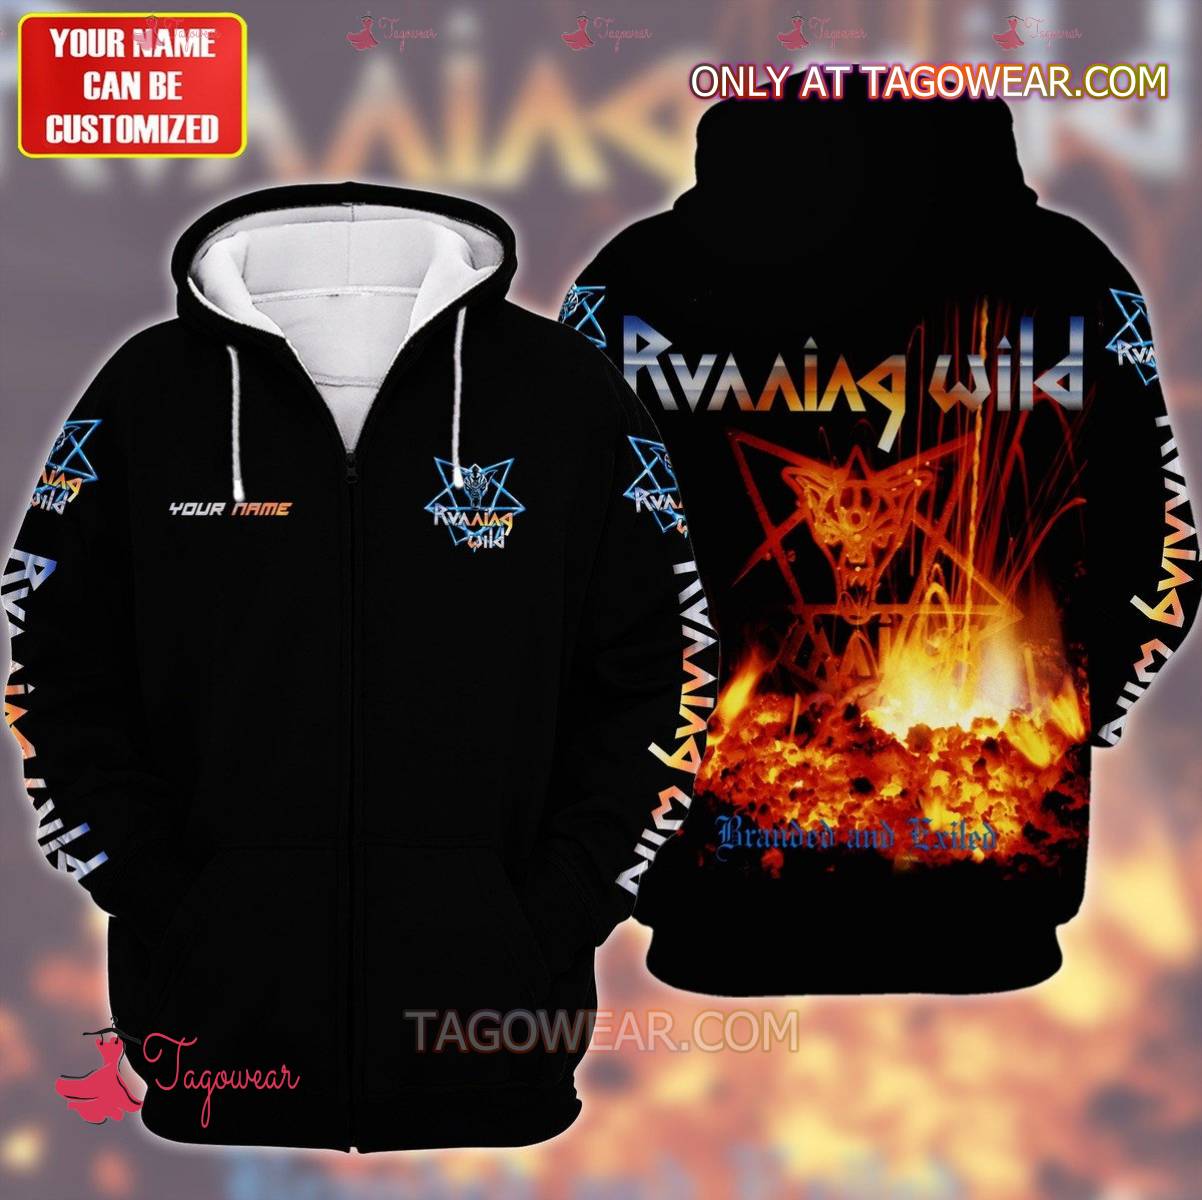 Running Wild Branded And Exiled Personalized Fleece Hoodie a